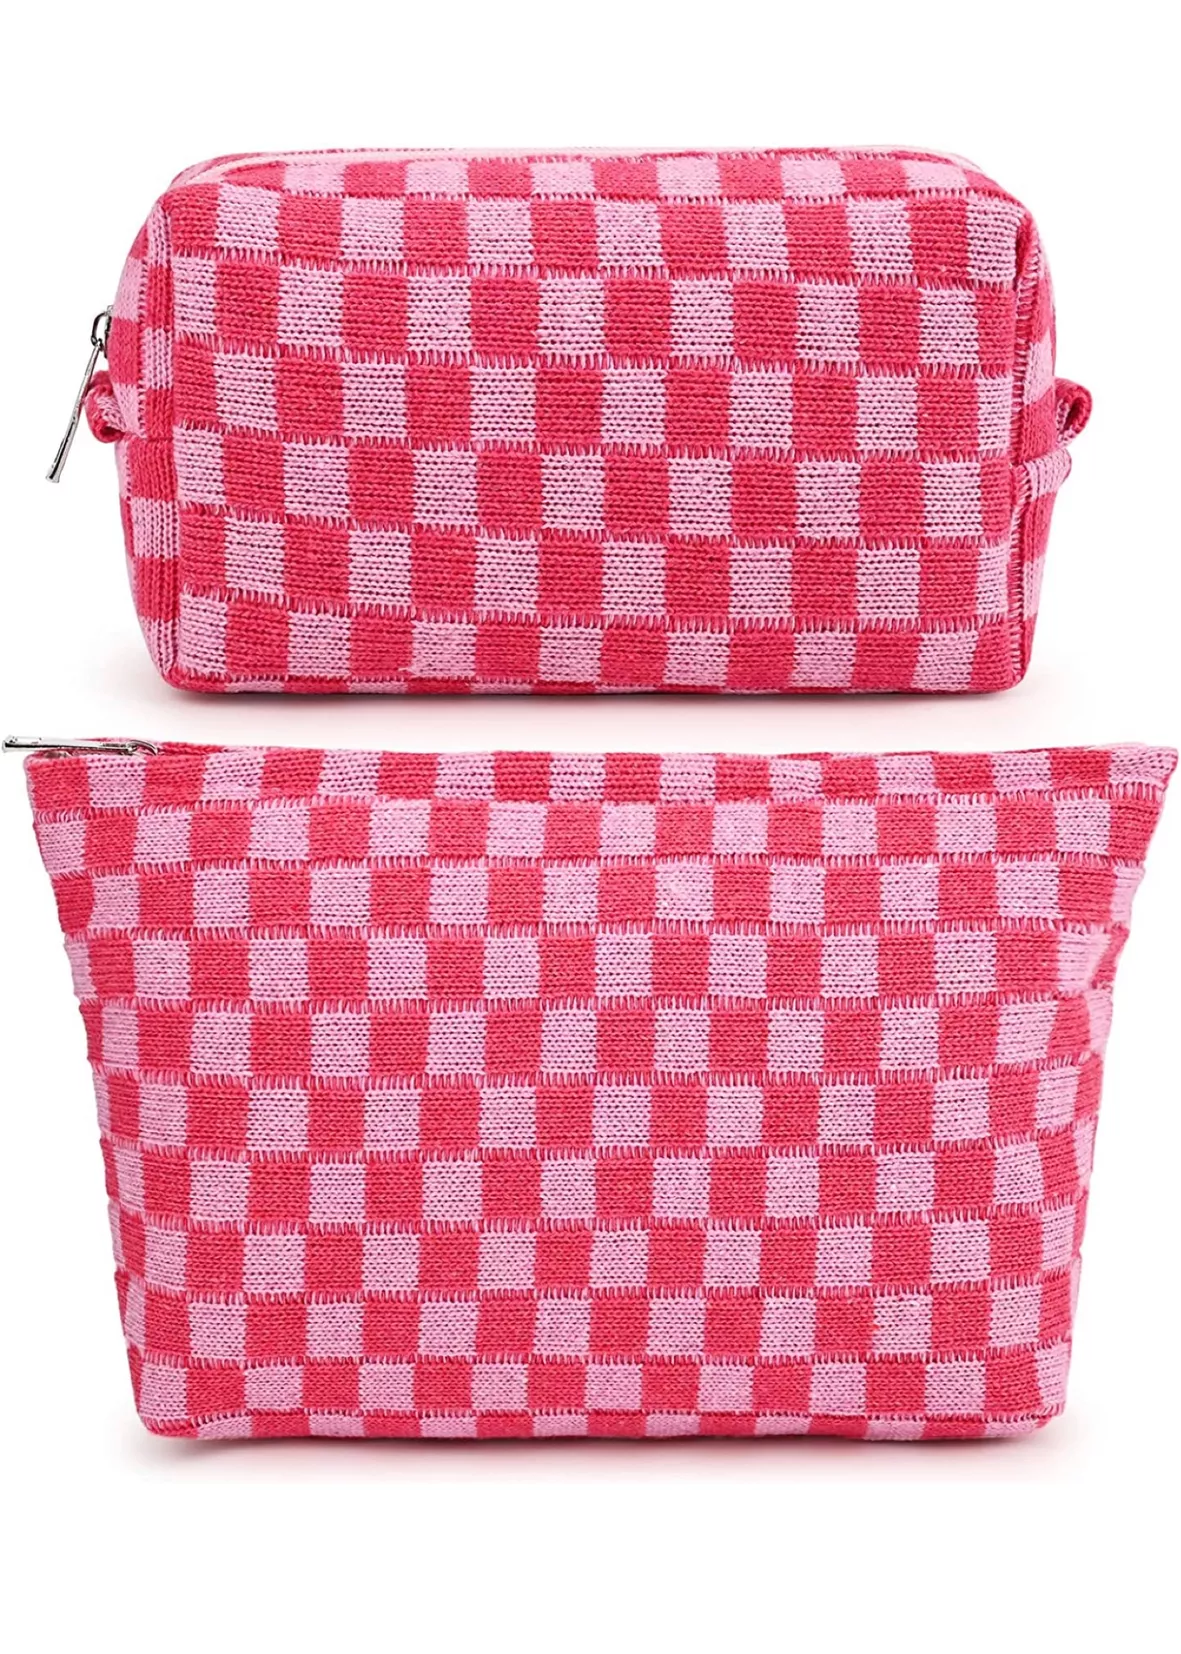 Plaid Makeup Bag Checkered Makeup Bag Travel Toiletry Bag Checkered Cosmetic  Bag Portable Makeup Bags Pouch Travel Organizer Cases for Women Girls  Vacation Travel Cosmetic Bag Pink 